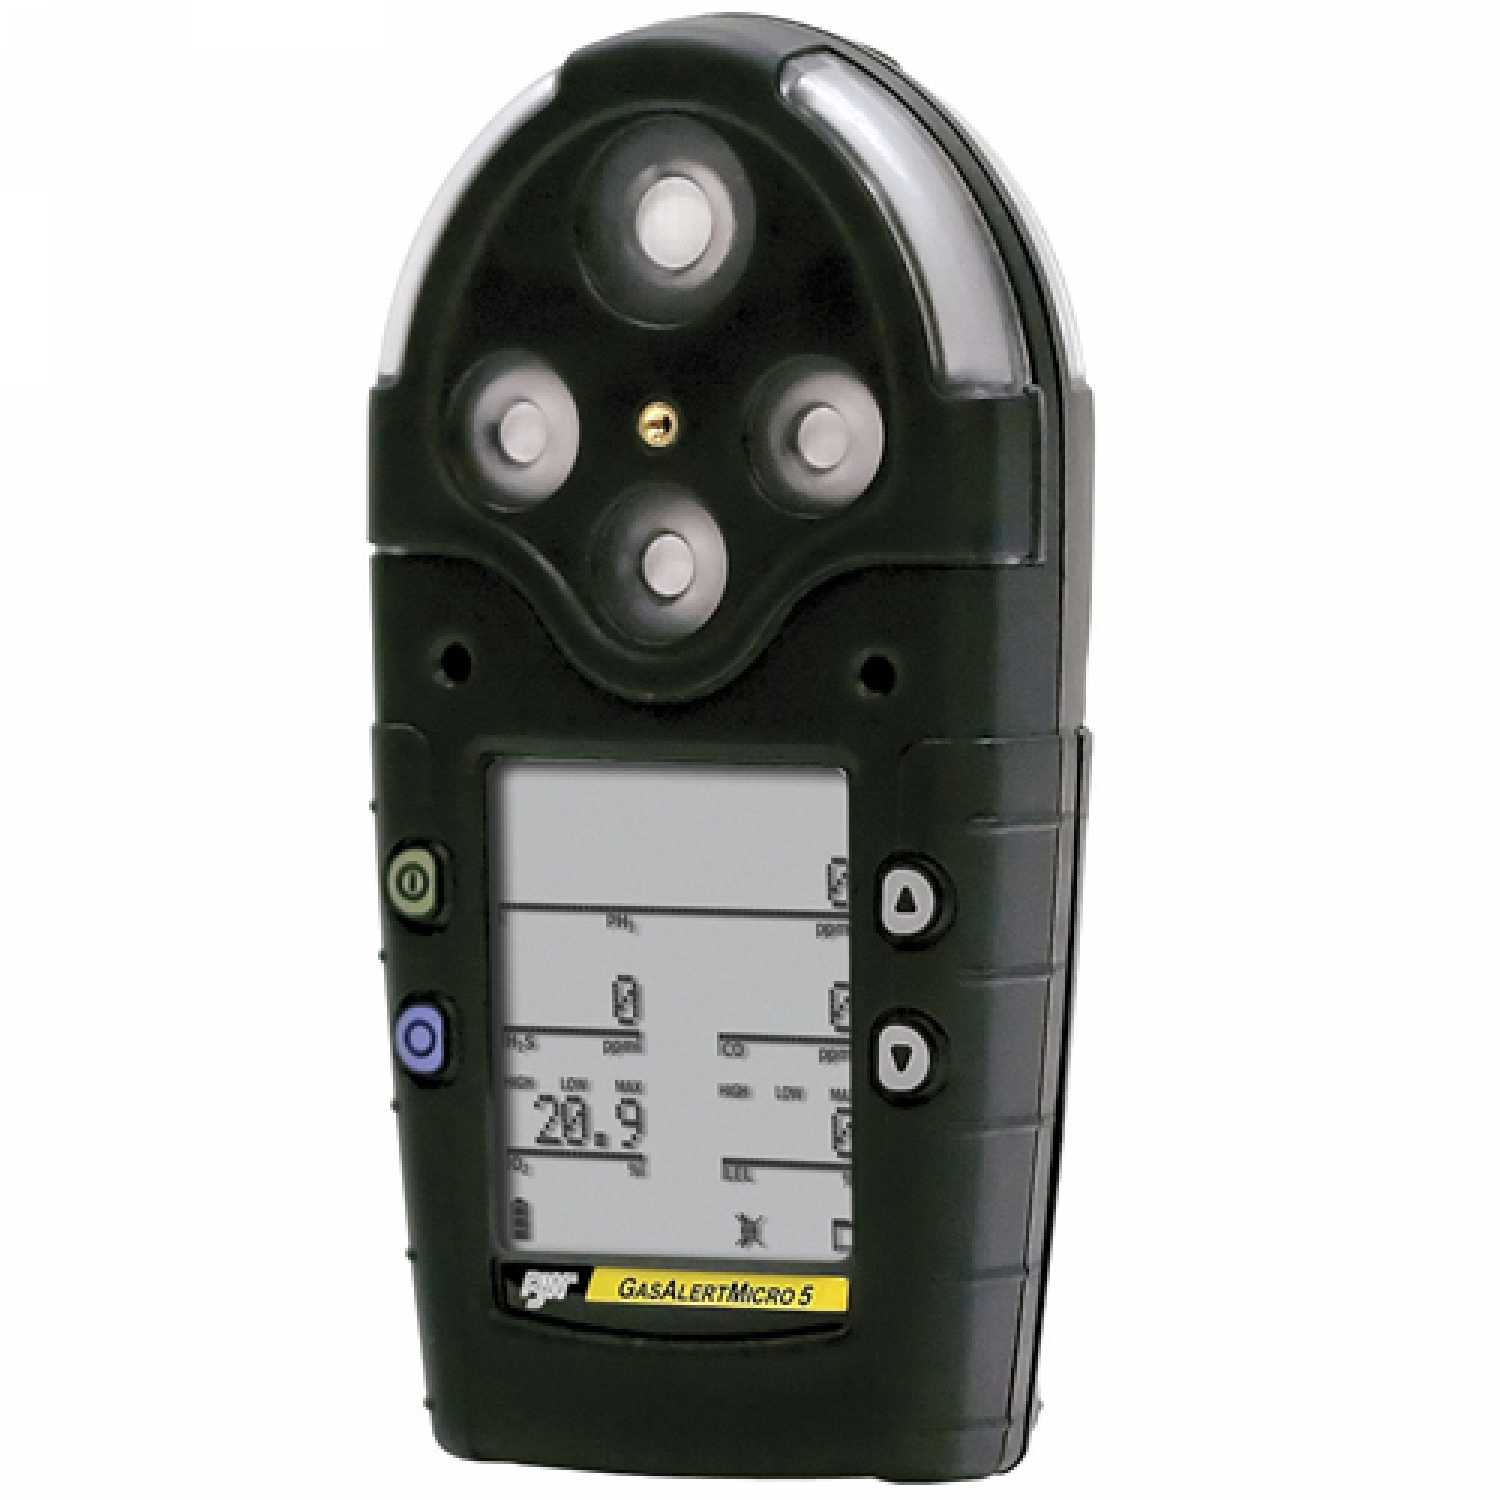 Bw Technologies Gasalert Micro Pid M Pid Gas Detector With Pid